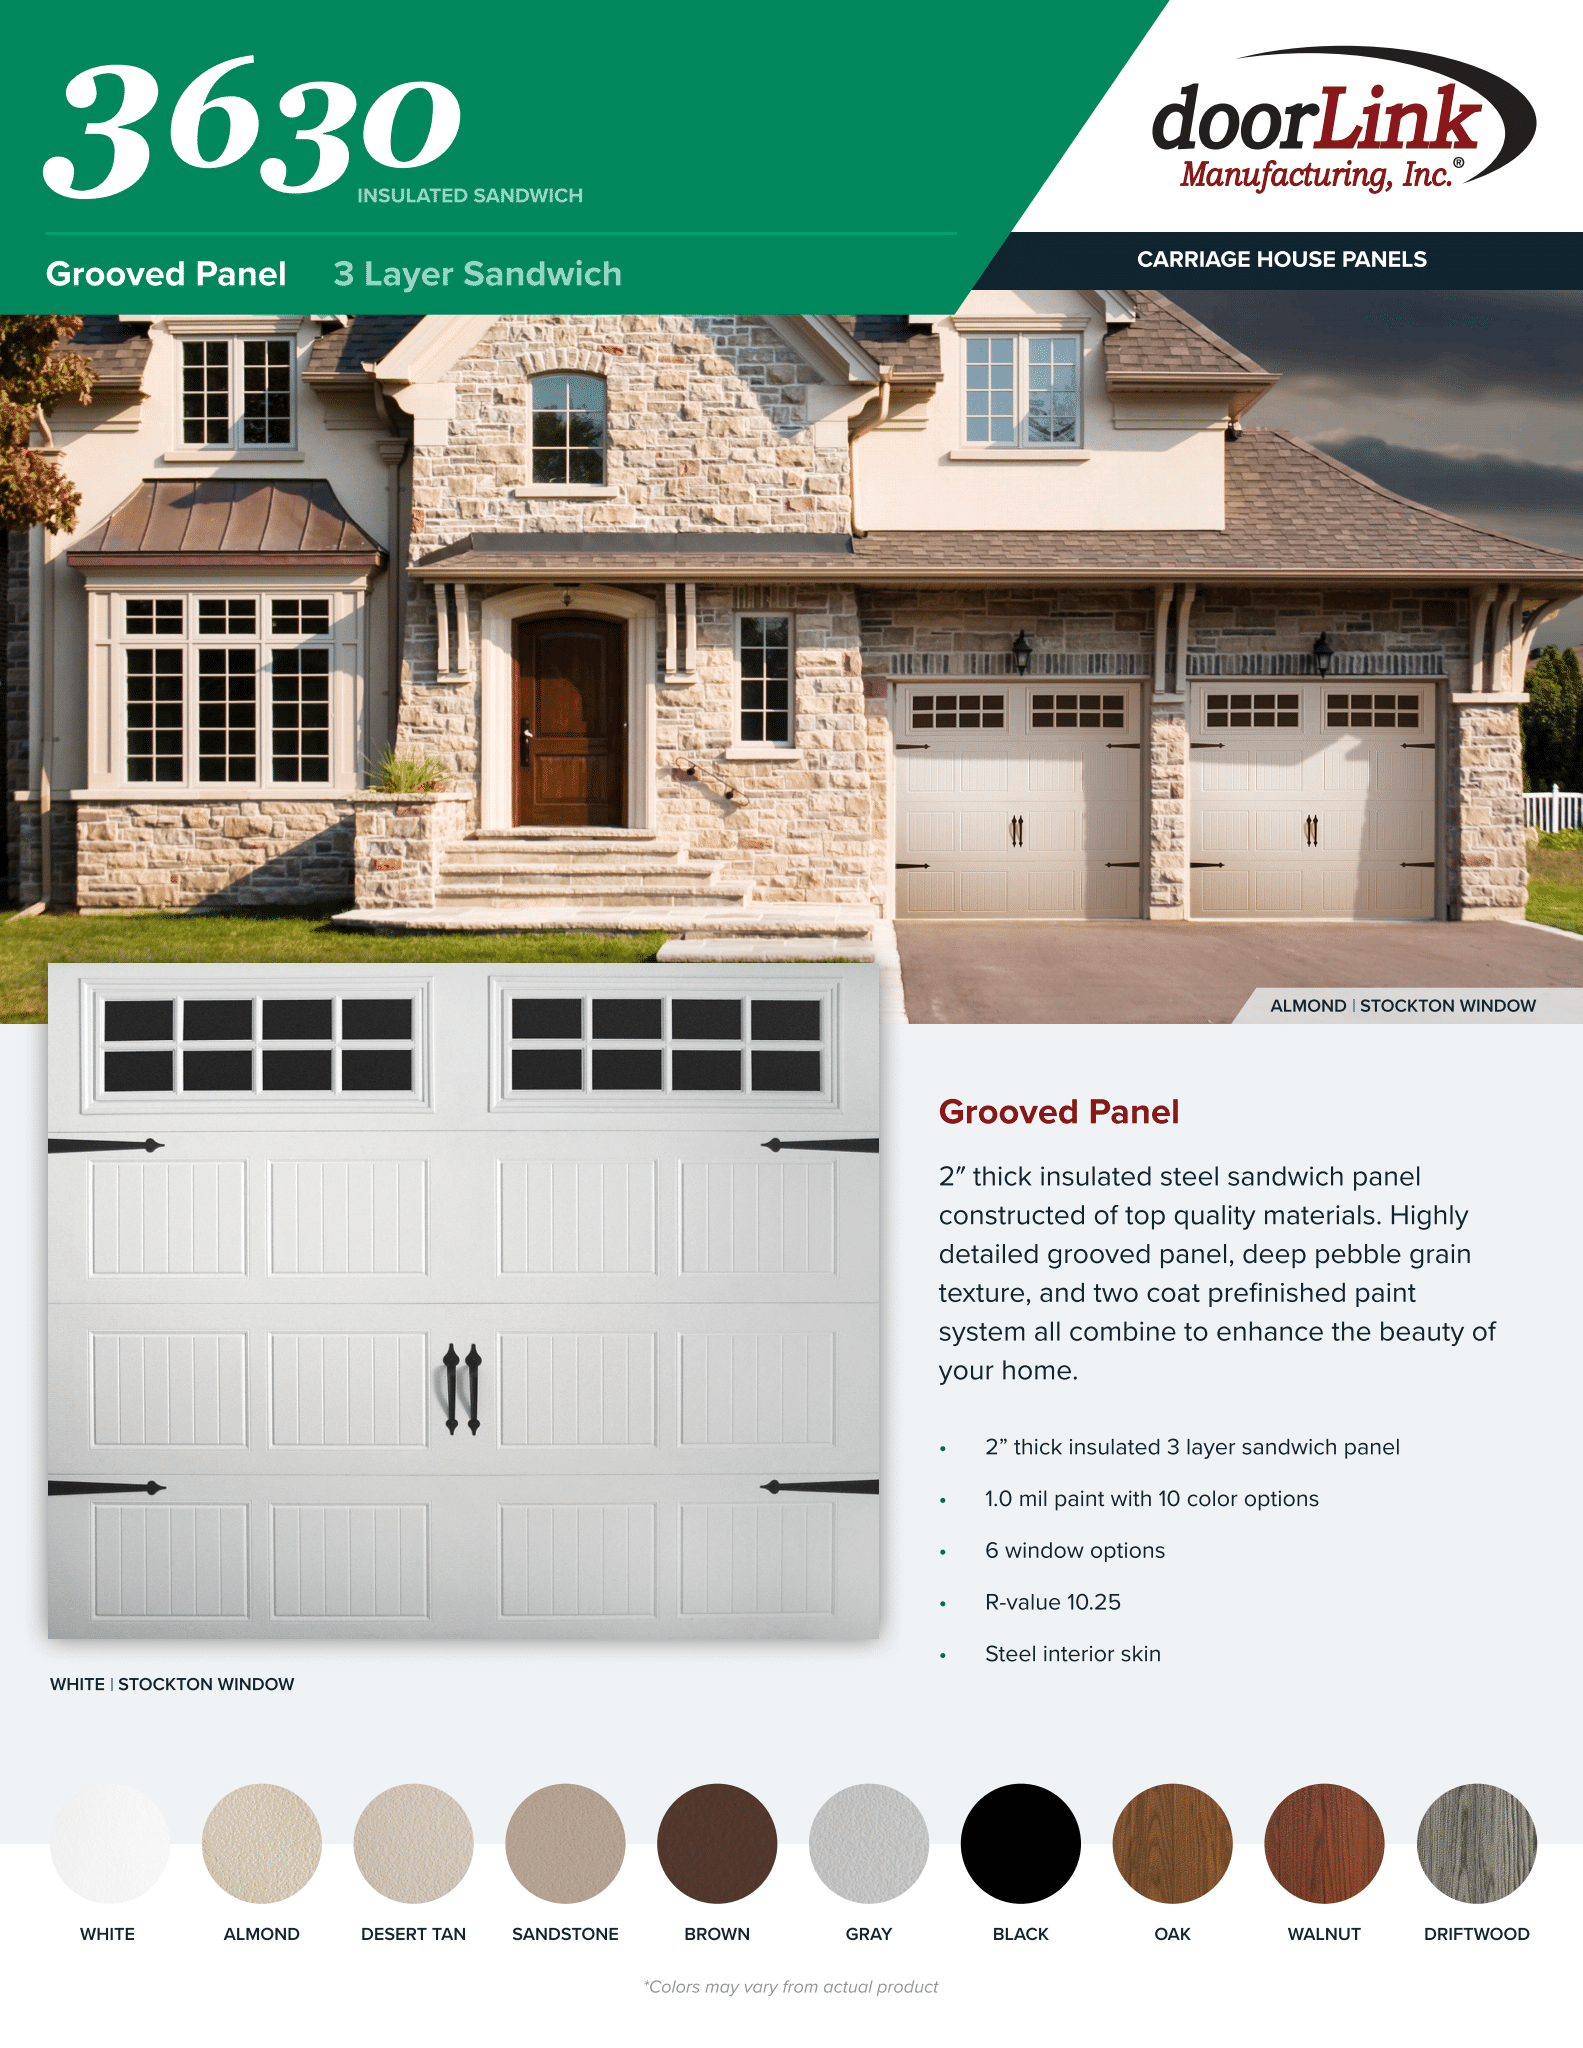 3 Layers Grooved Panel Page 1 — St. Charles, MO — Garage Door Gurus